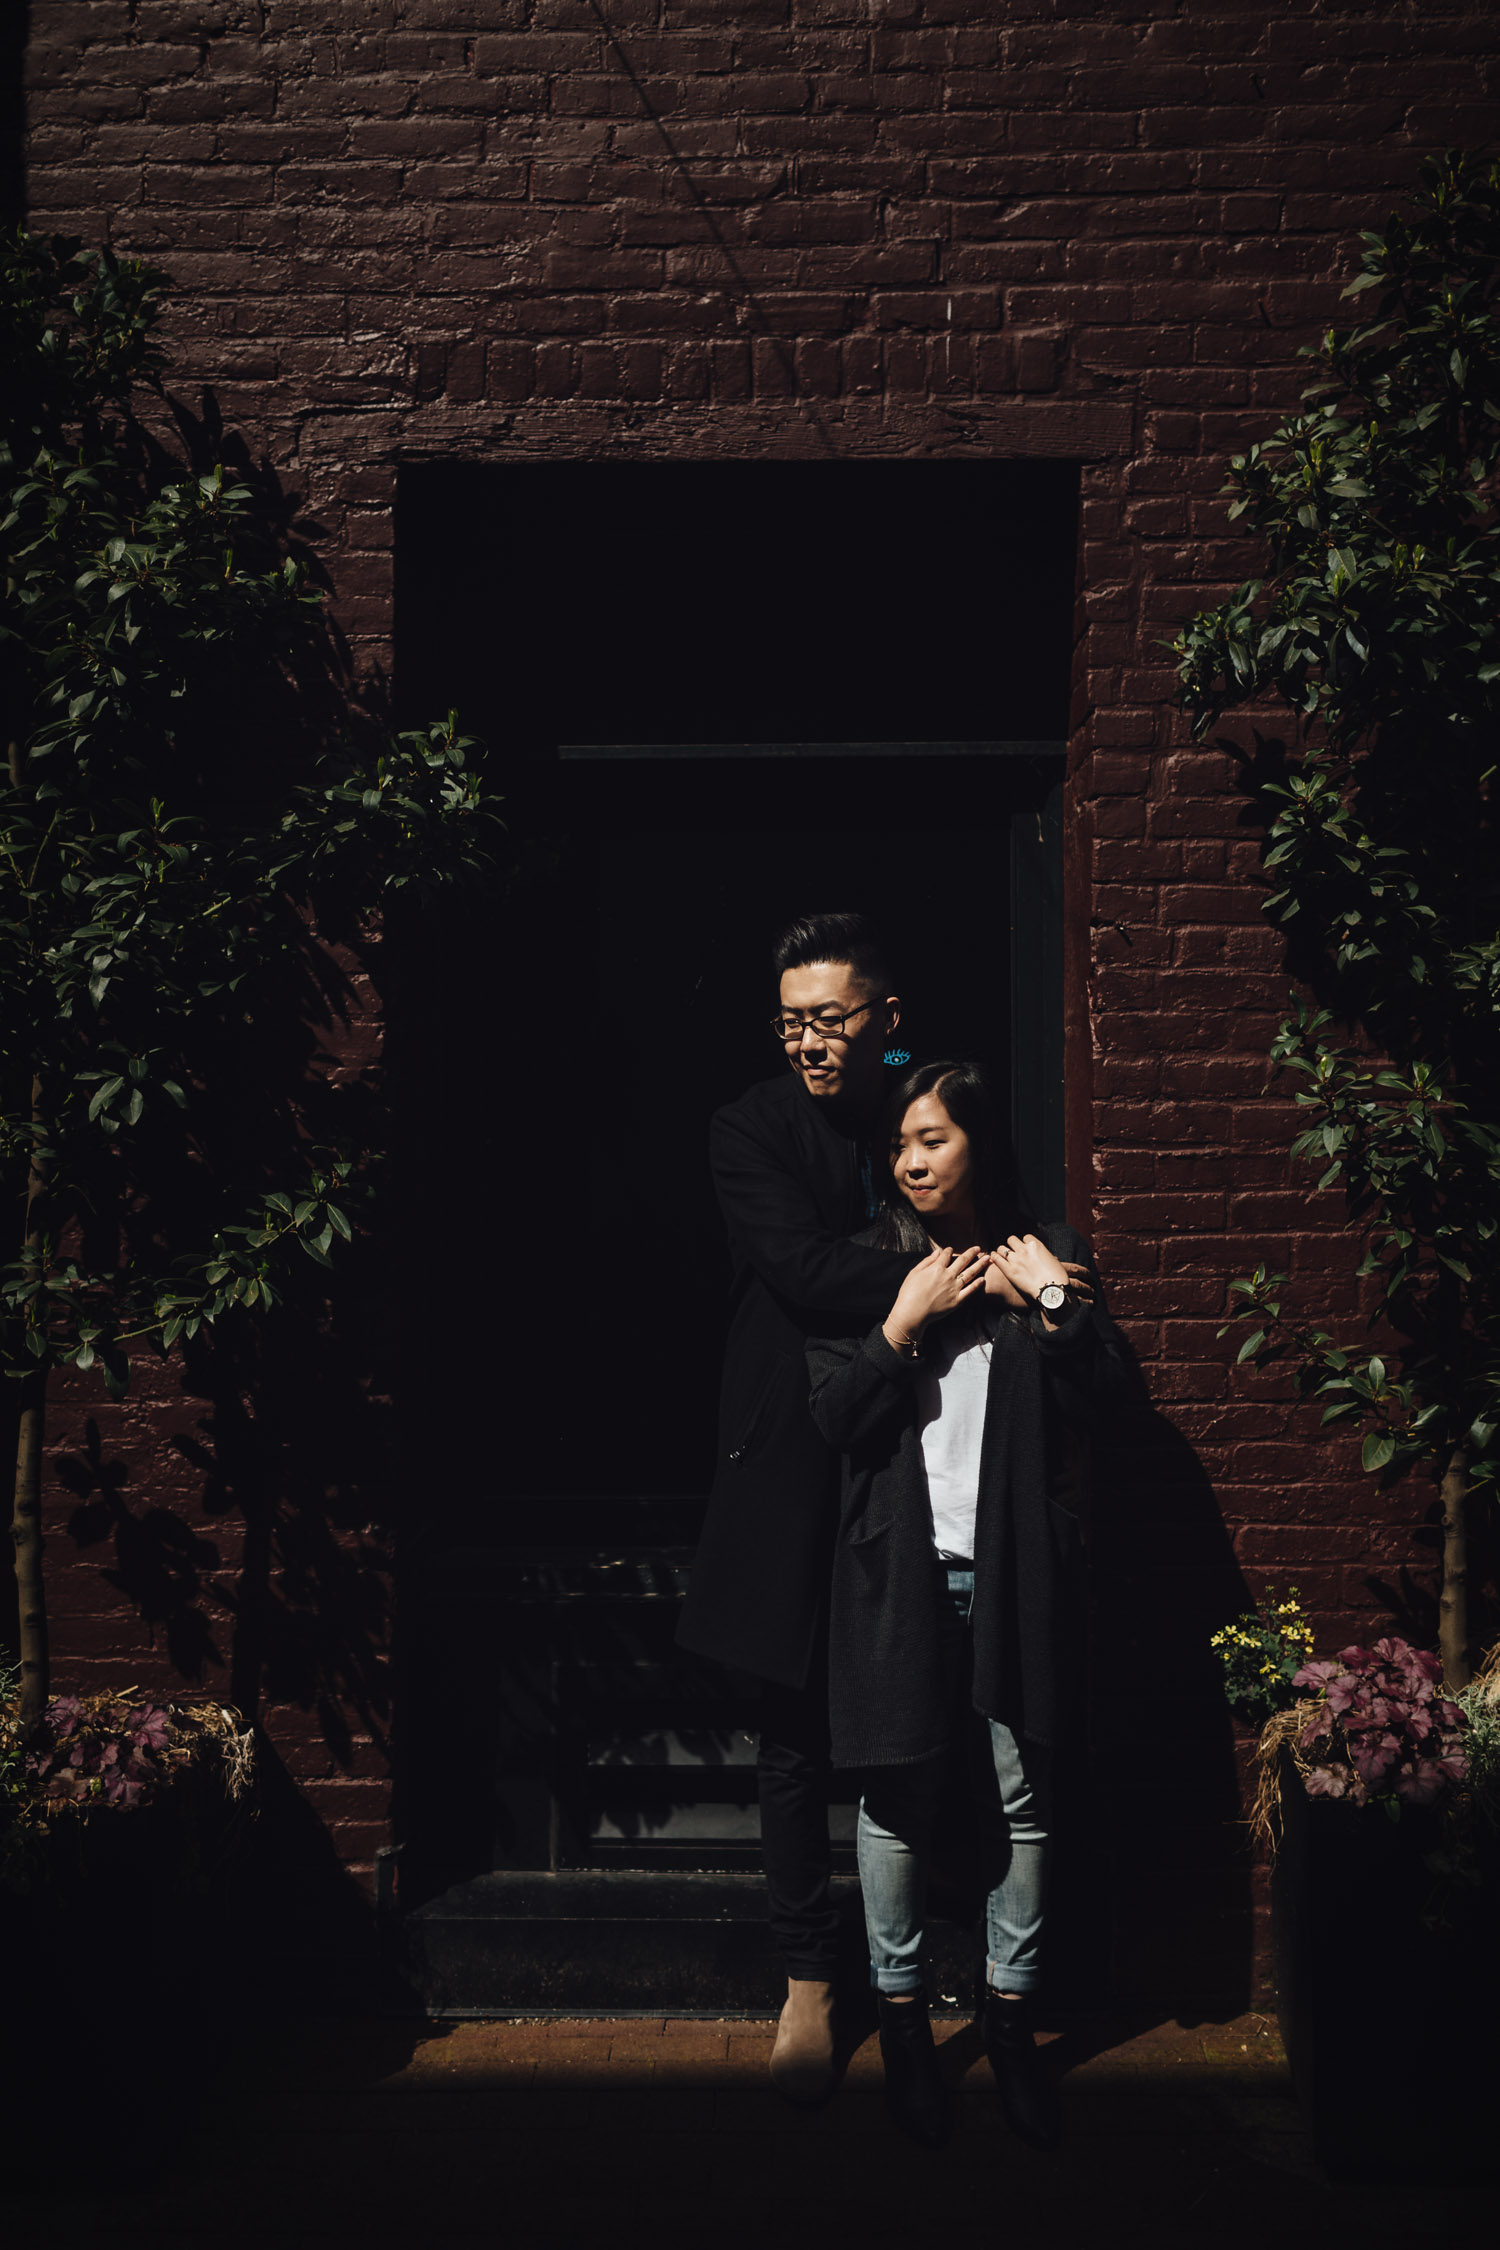 gastown blood alley engagement photography harsh light vsco vancouver bc